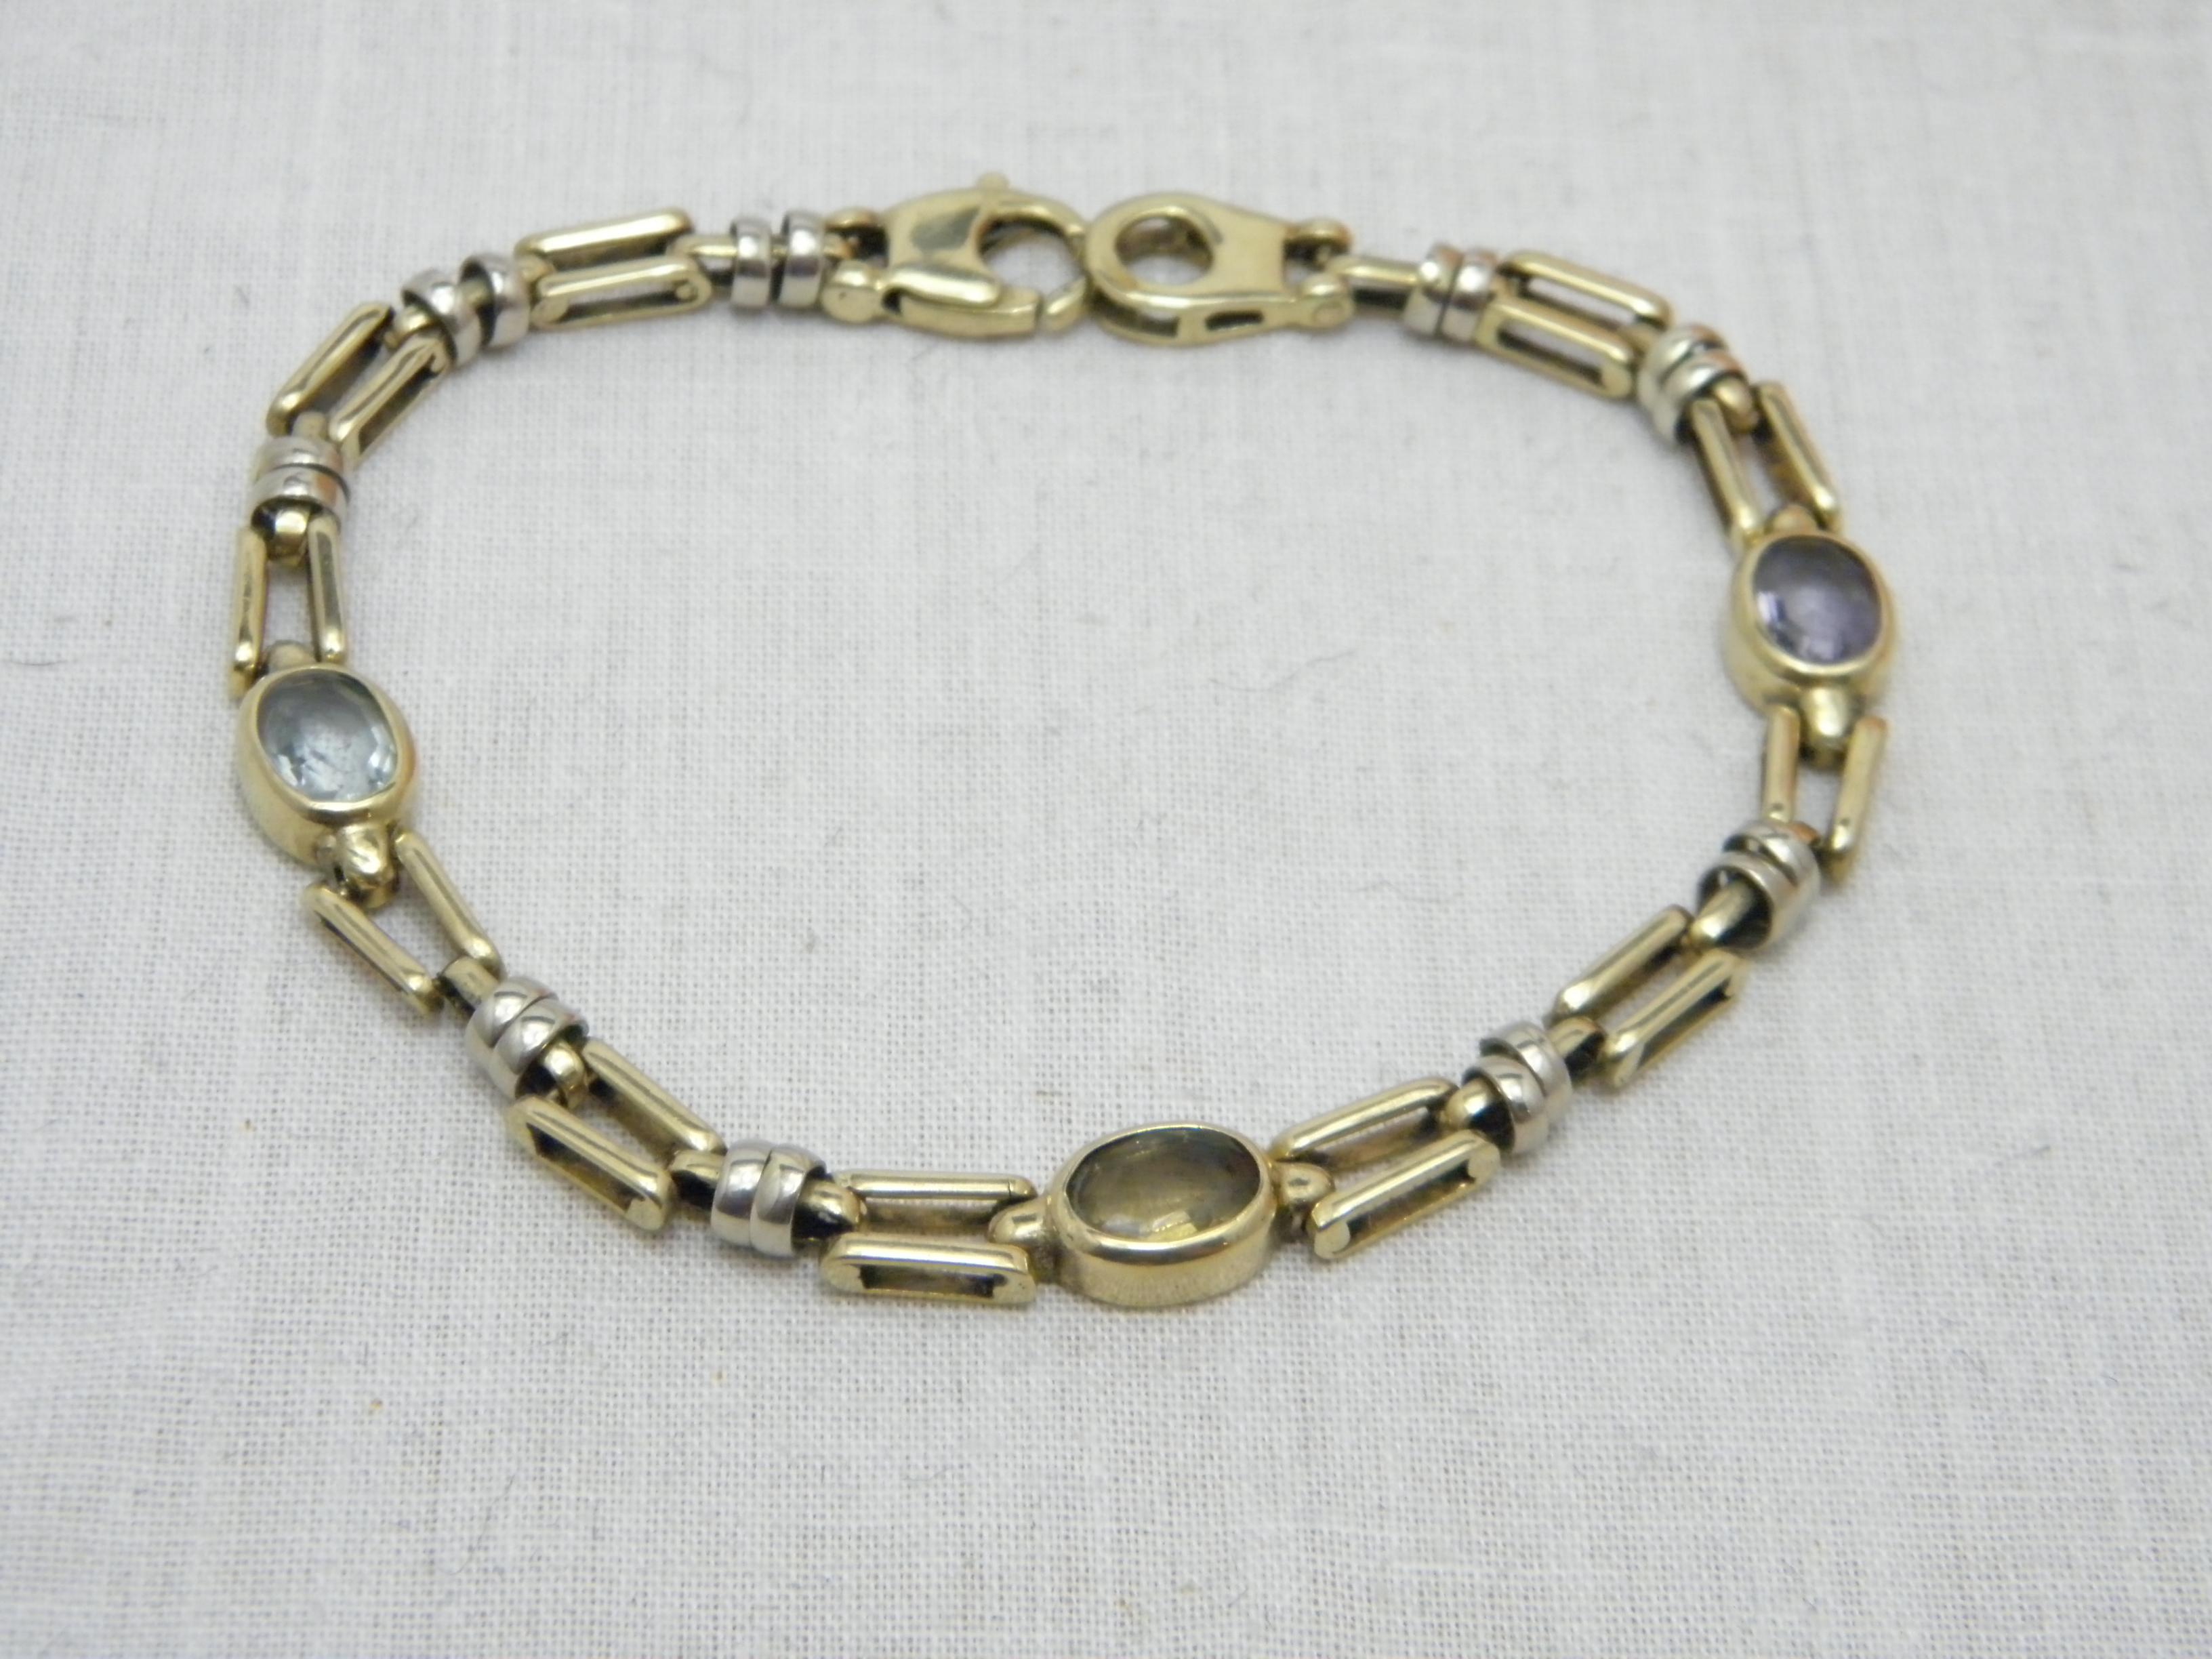 If you have landed on this page then you have an eye for beauty.

On offer is this gorgeous

14CT HEAVY GOLD AMETHYST CITRINE AQUAMARINE BRACELET

DETAILS
Material: Solid 14ct (585/000) yellow and white gold
Gemstones: Lovely oval cut amethyst,